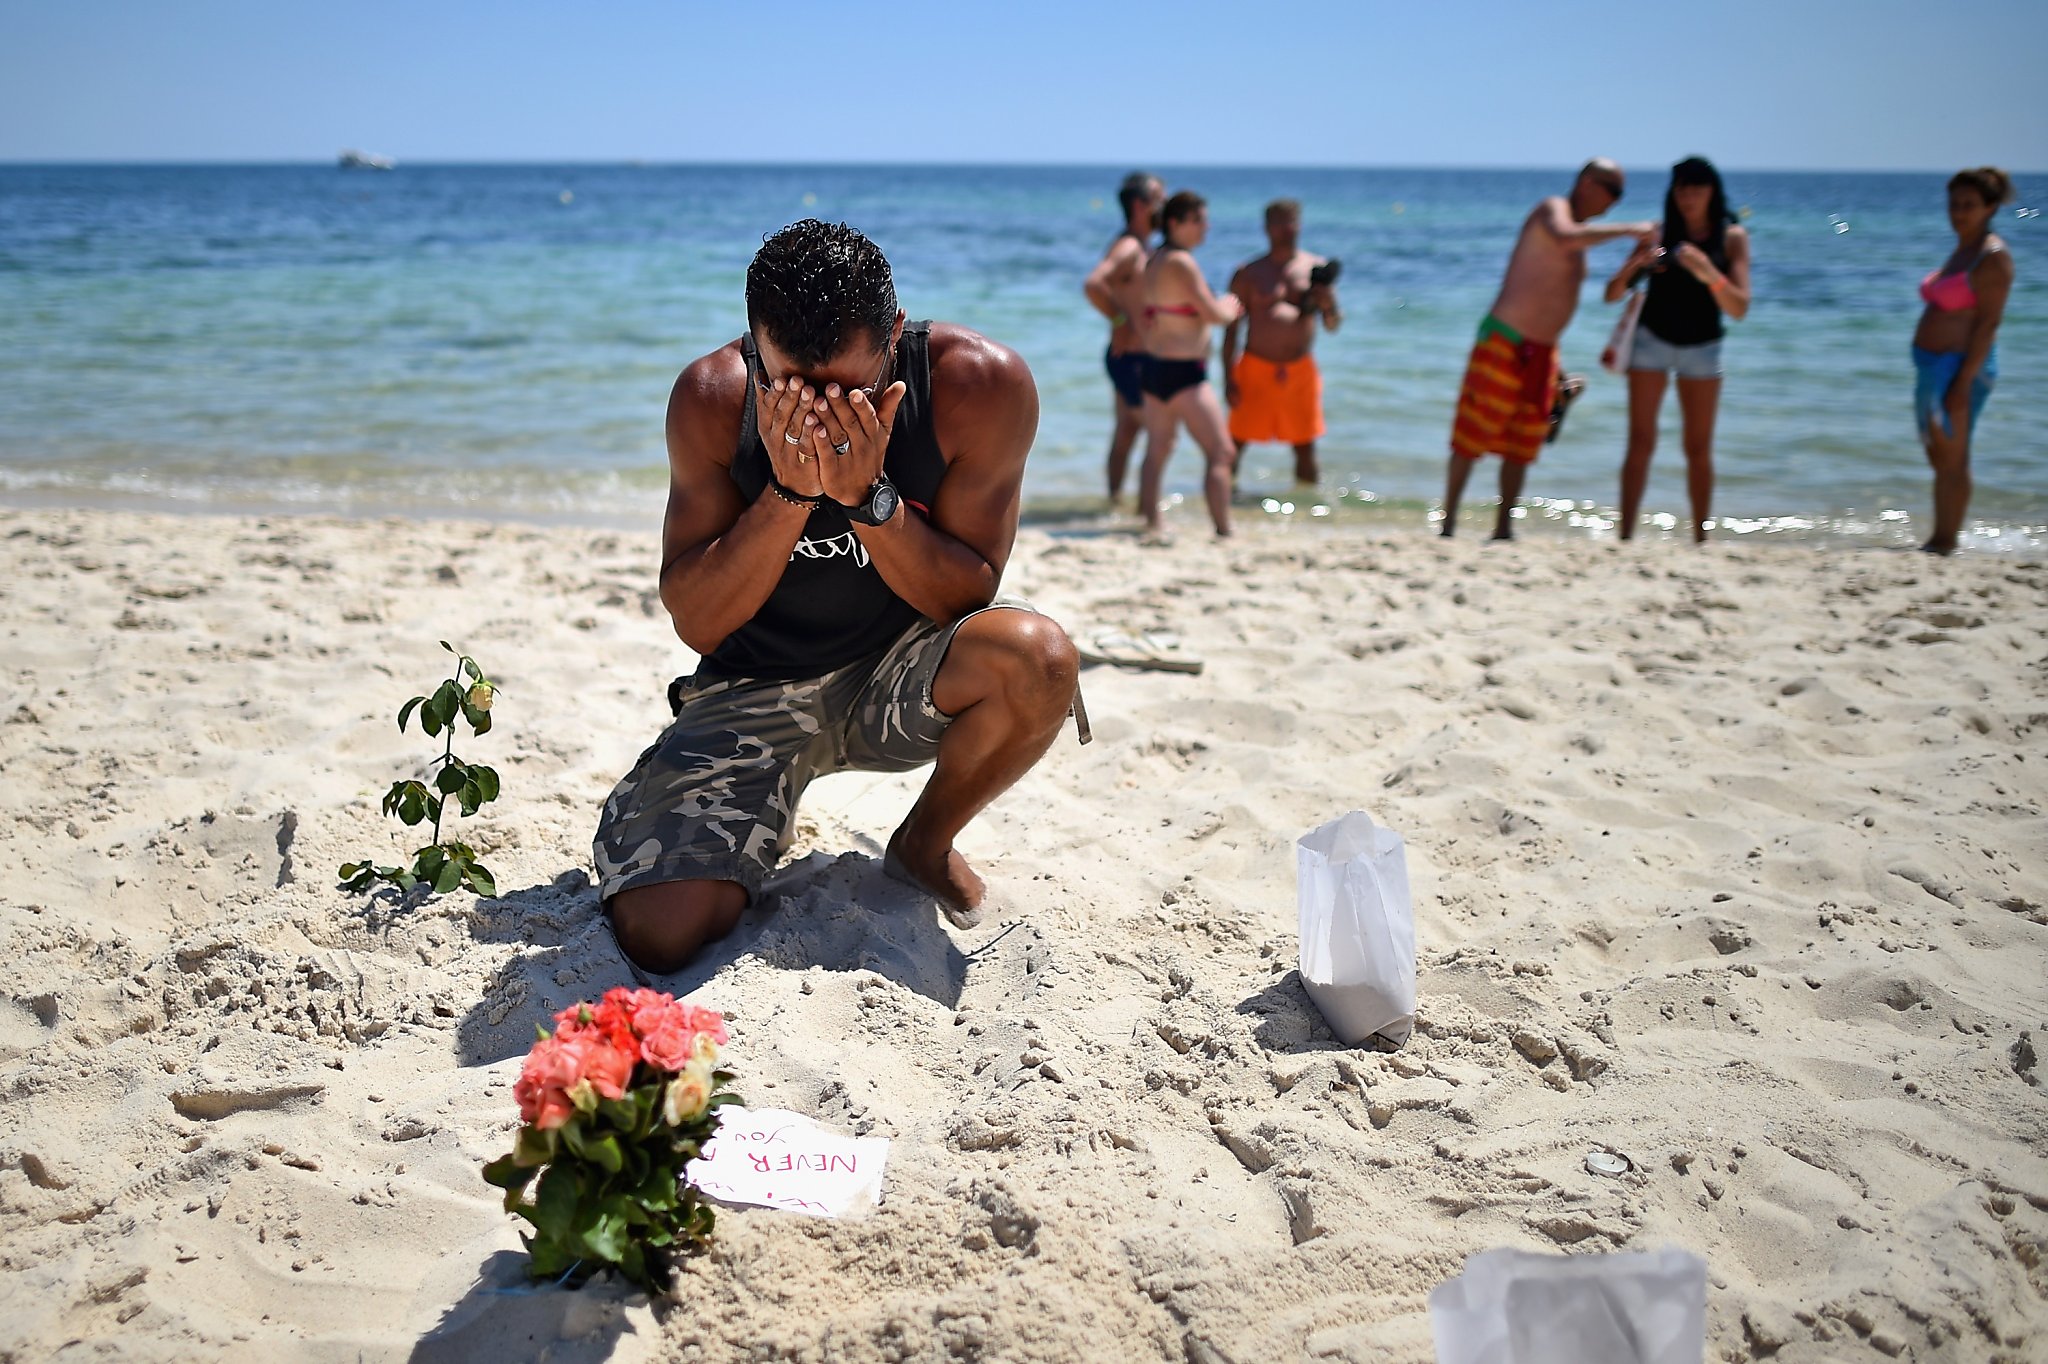 SOUSSE, Tunisia — The student who massacred vacationers on a Tunisian beach...